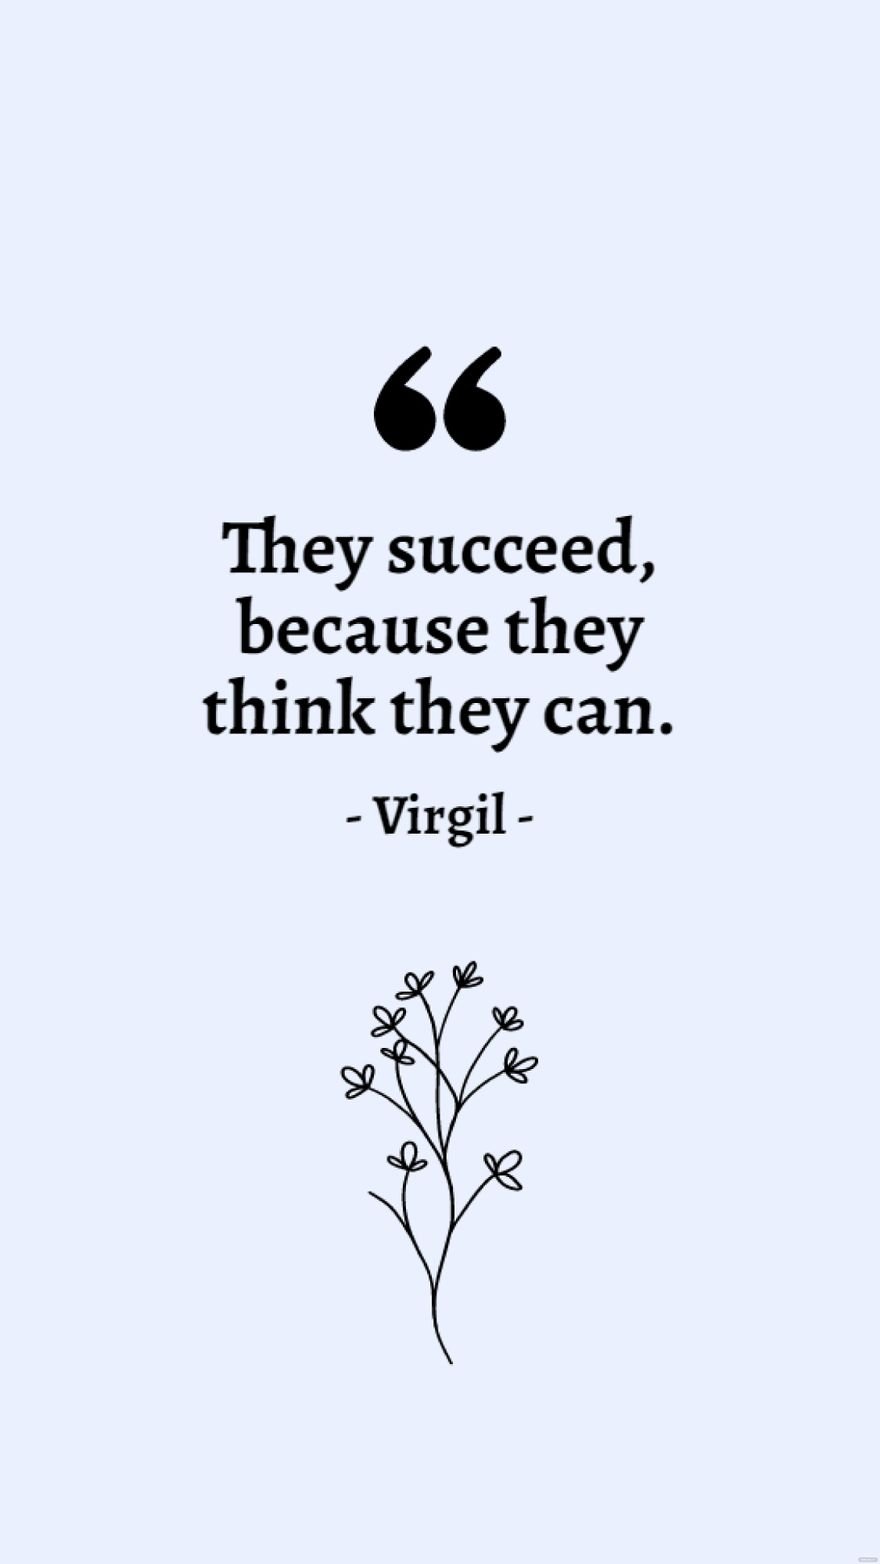 Virgil - They succeed, because they think they can.